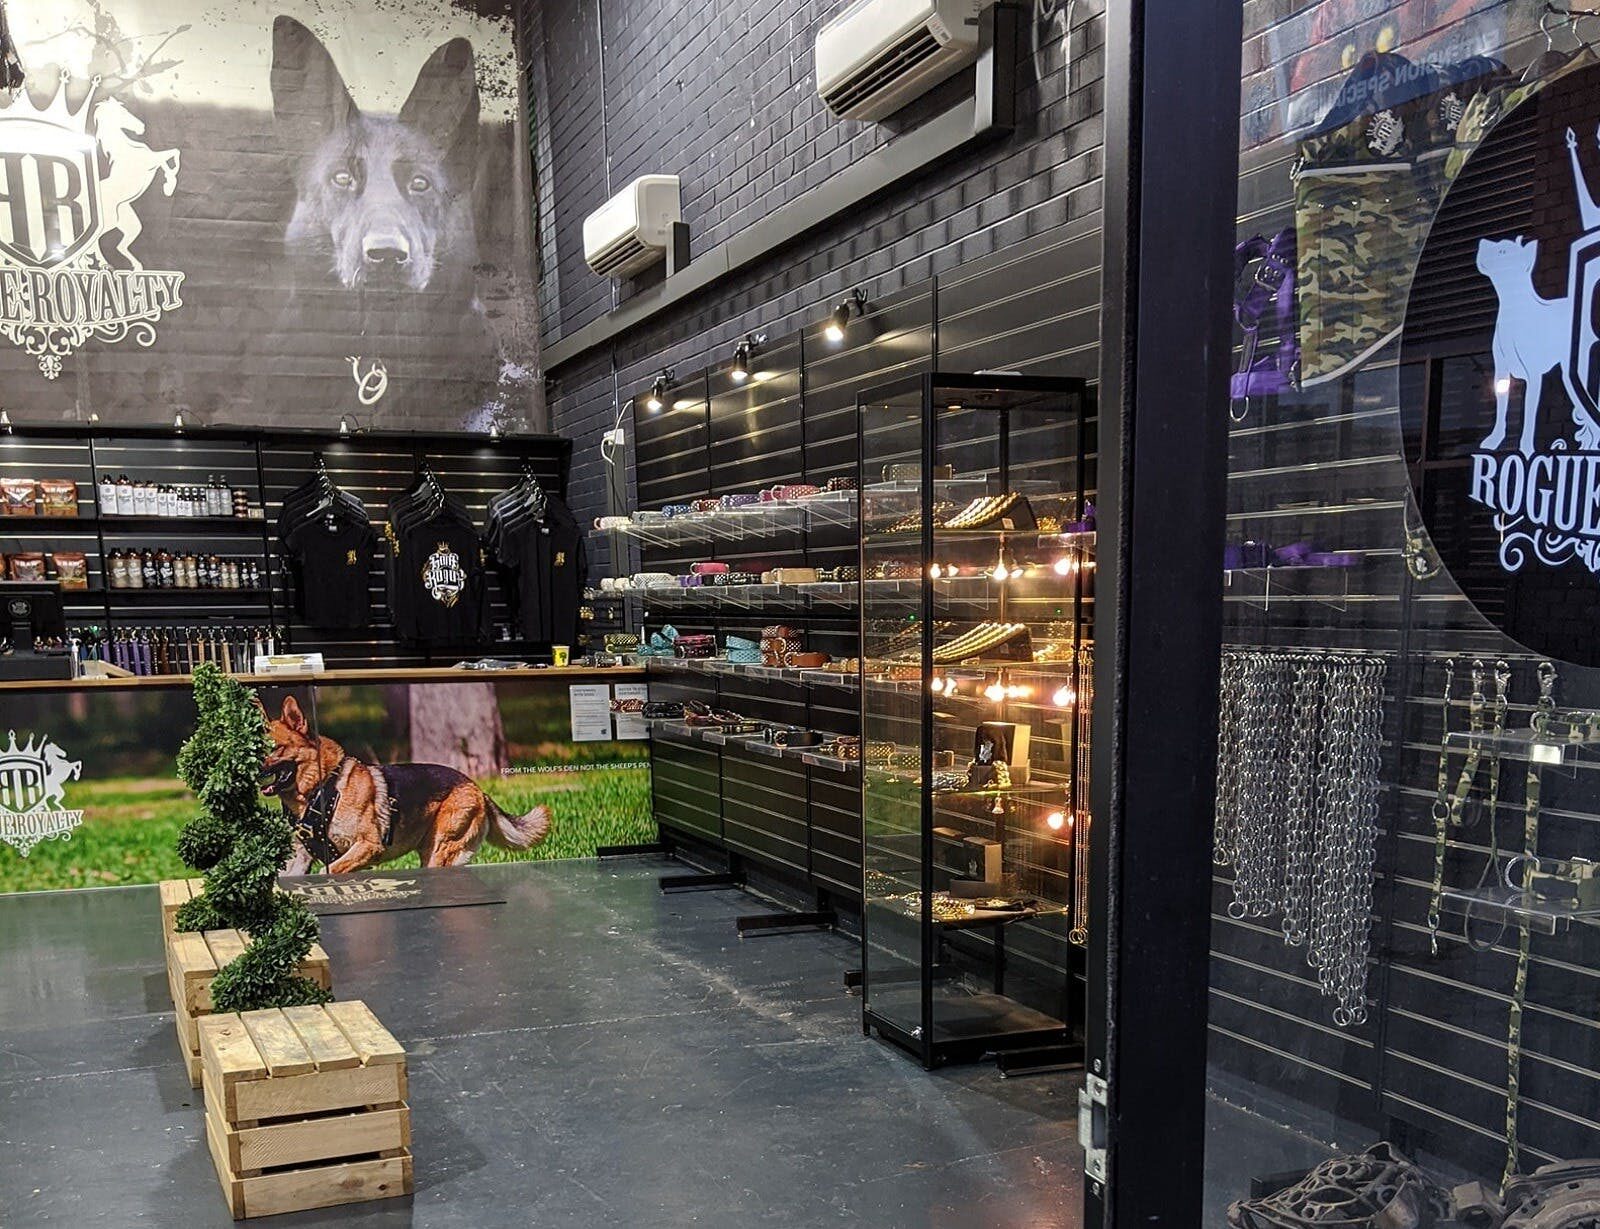 Interior of Rogue Royalty shop in Campbelltown